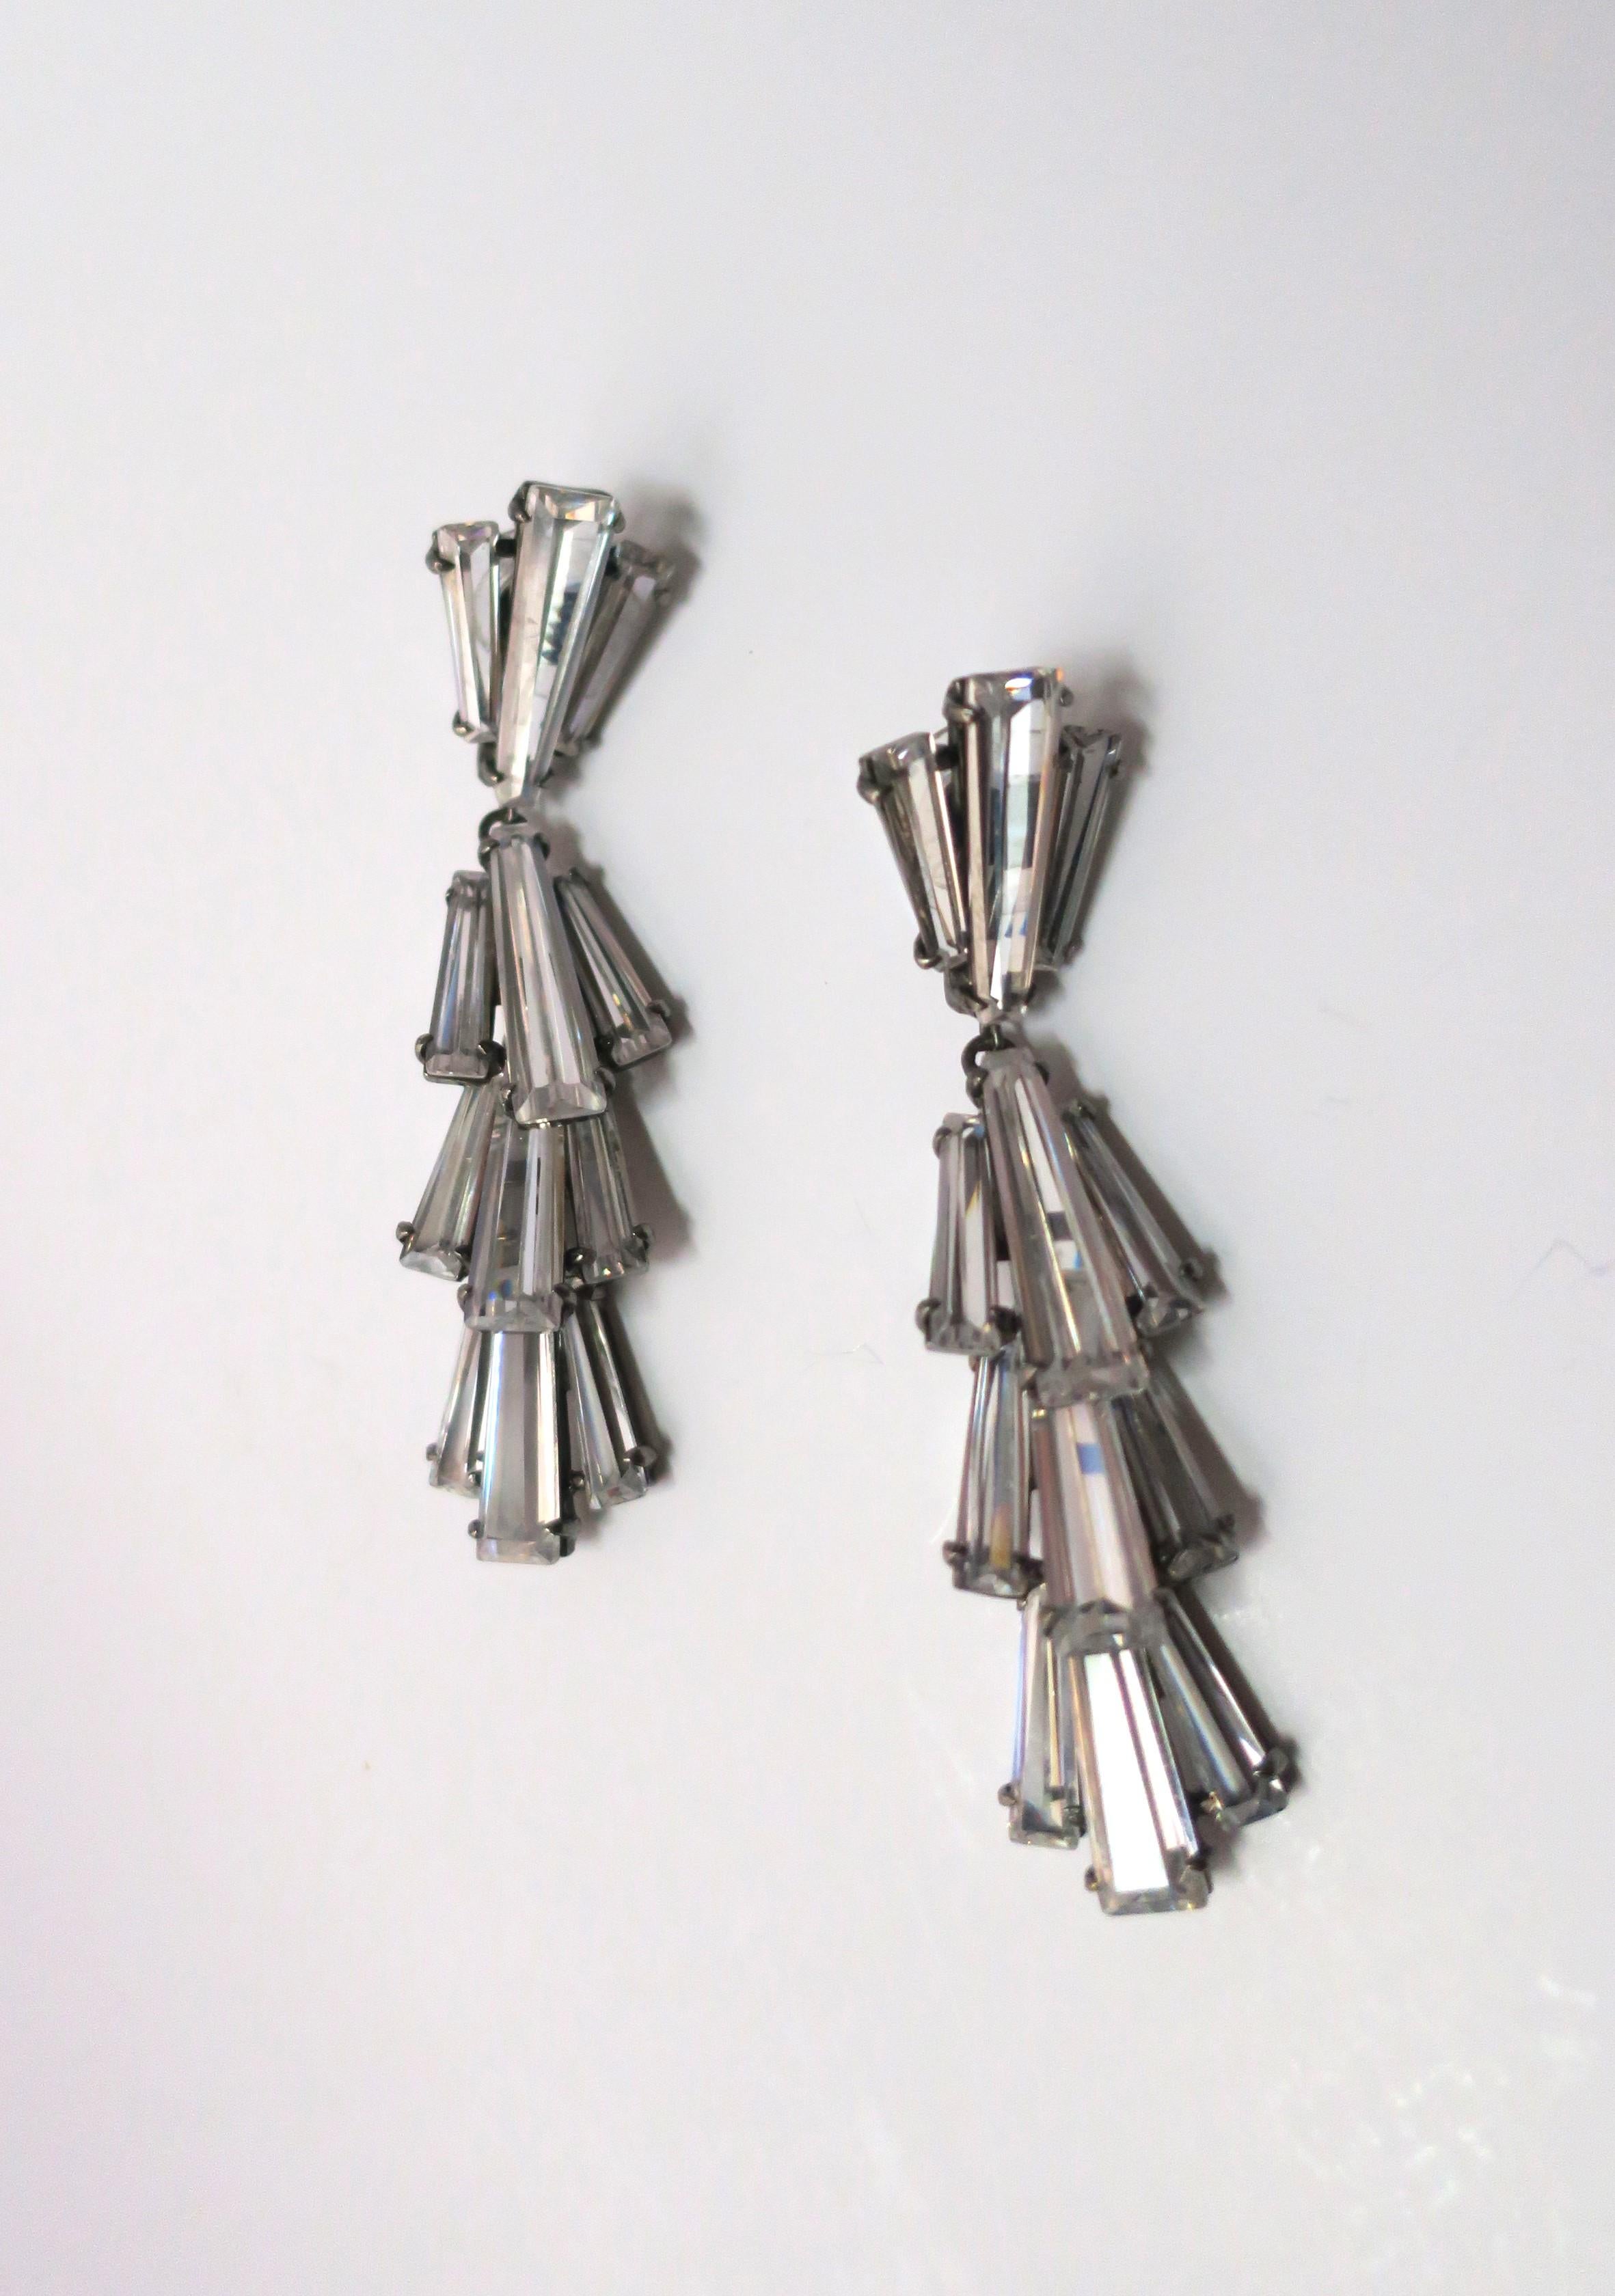 A gorgeous pair of diamond-like crystal dangle earrings by Jarin. Beautiful baguette cut crystals set in rhodium plate over sterling silver, circa early-21st century. With makers' mark 'JARIN' on back. A beautiful pair, dress up or down. Excellent